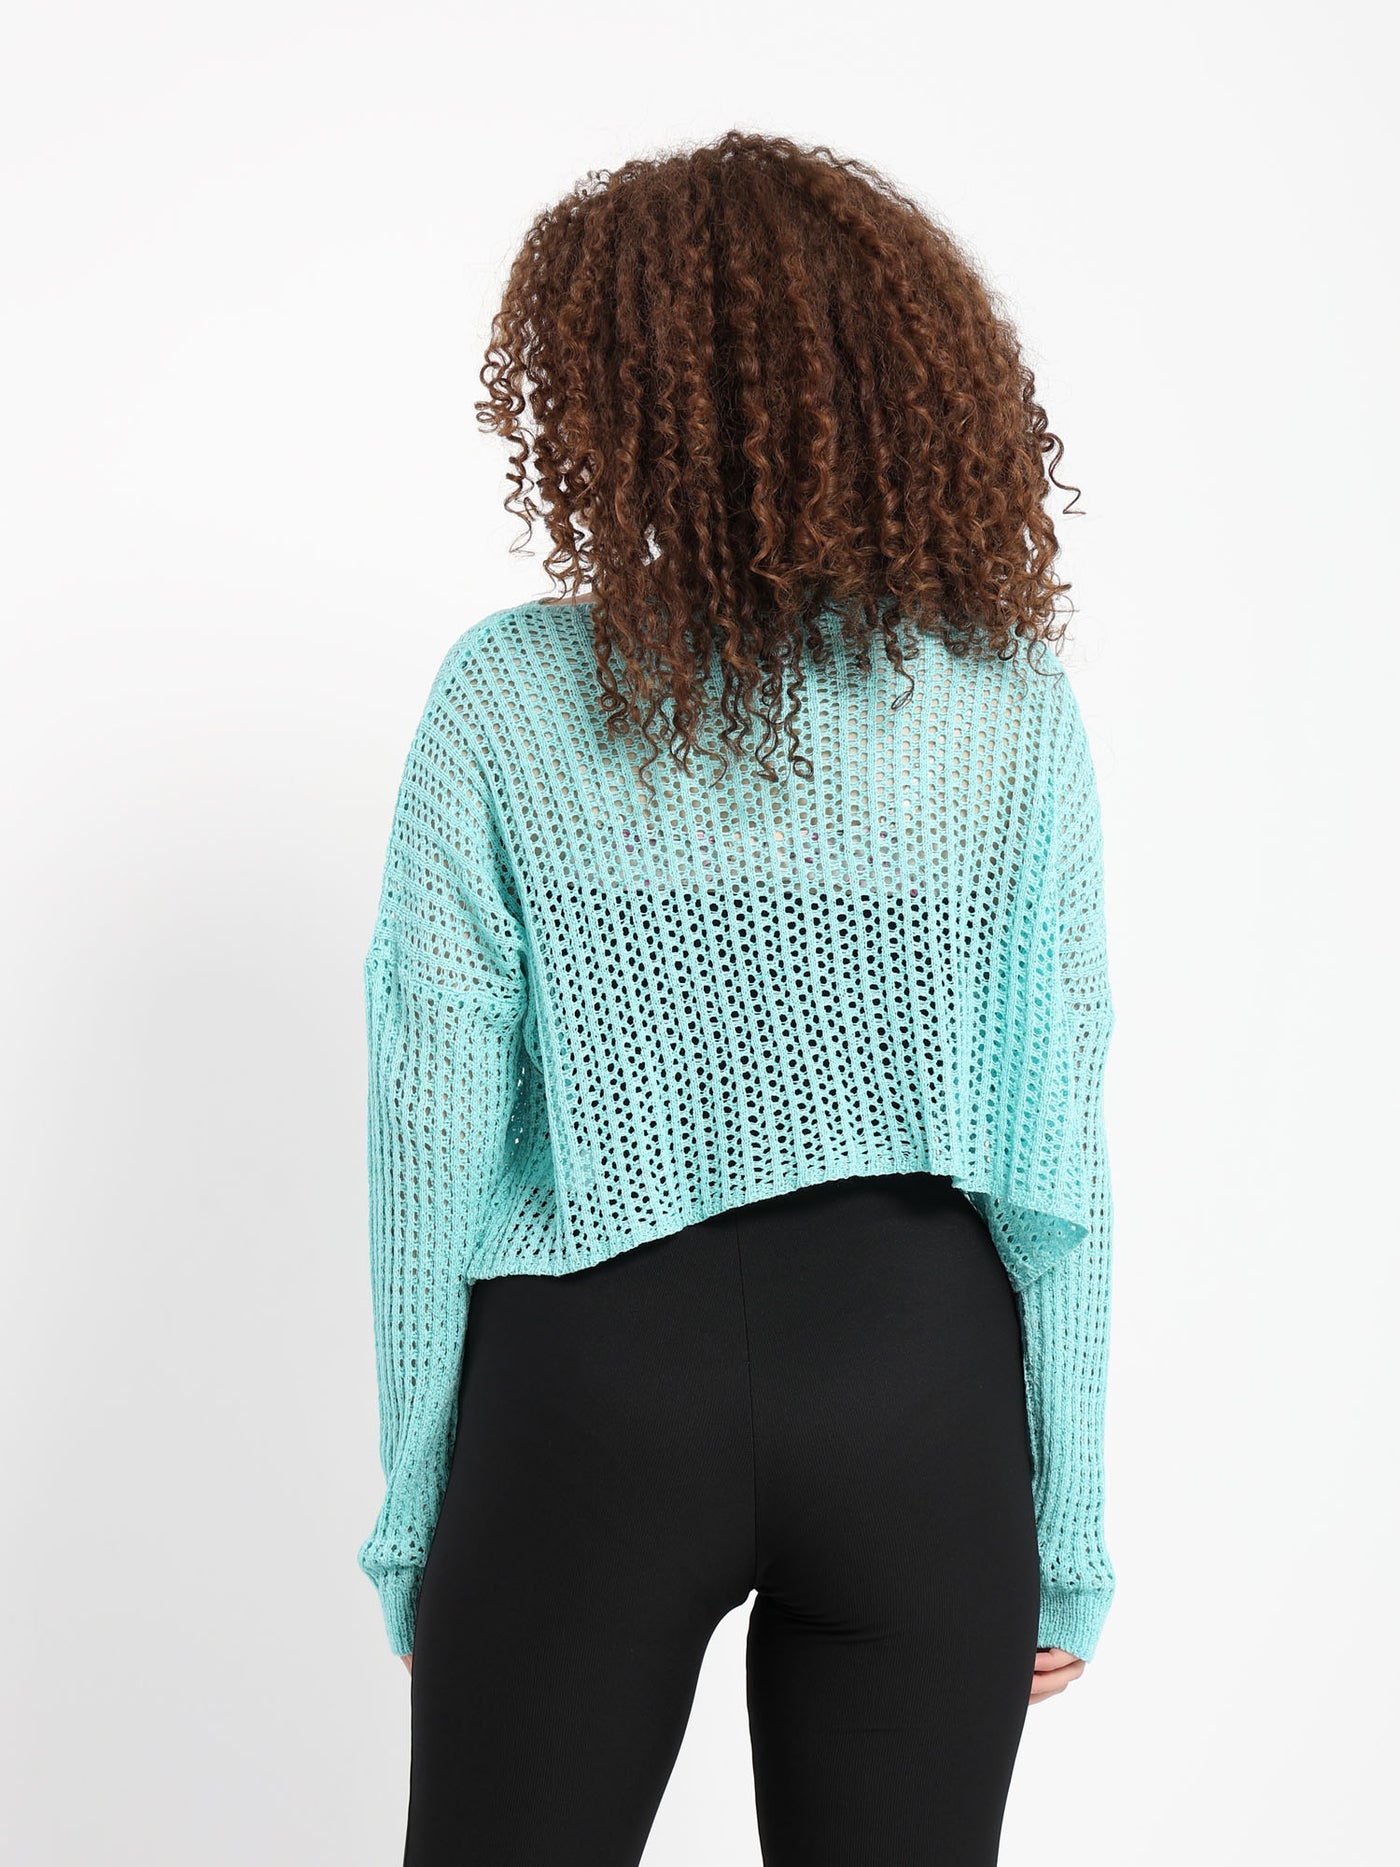 Top - Loose - Tricot